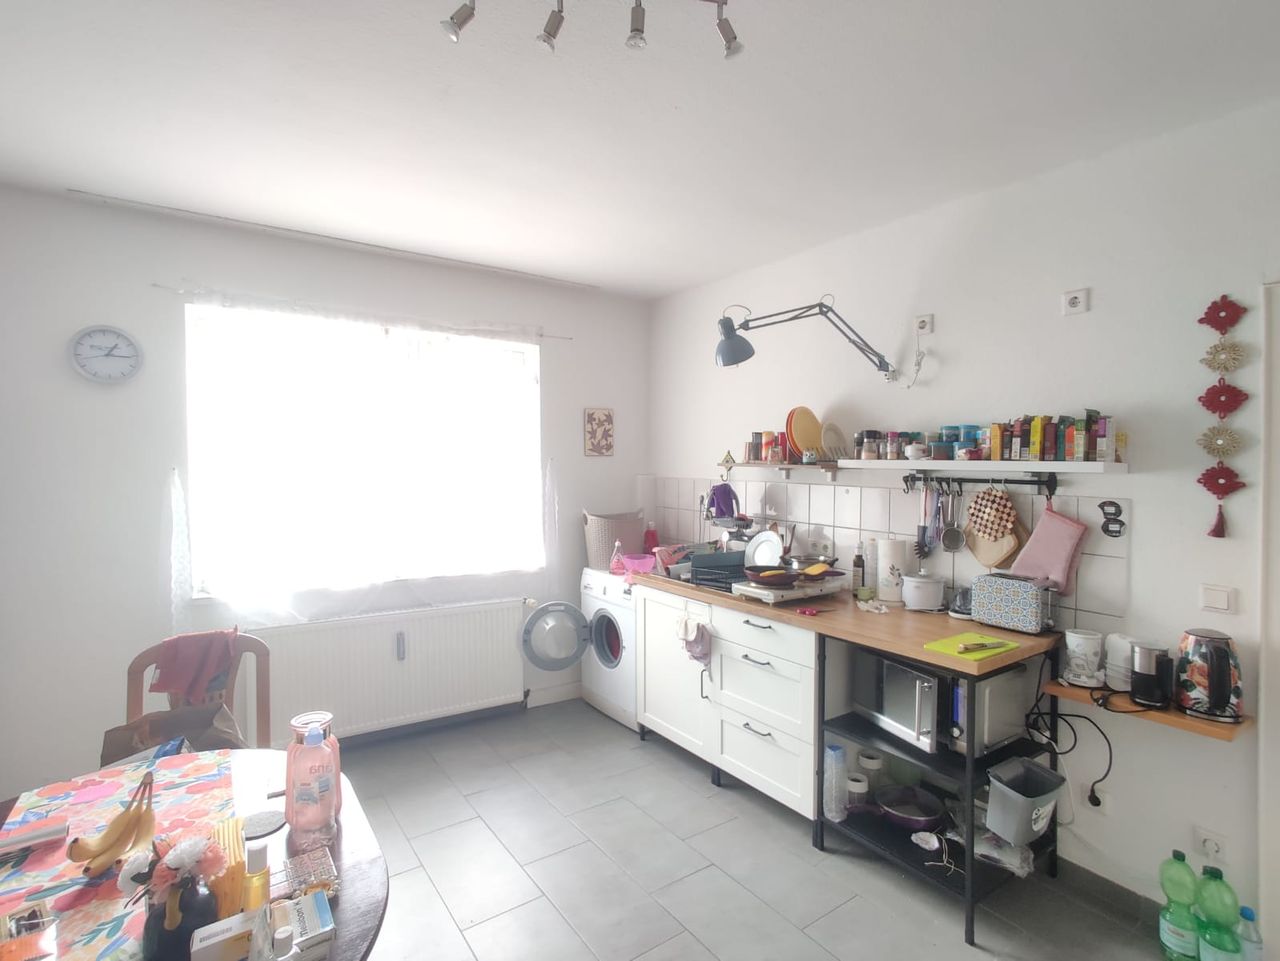 Cosy 2ZKB near Bochum city center for sublet (available for 6 months. Dates are negotiable)